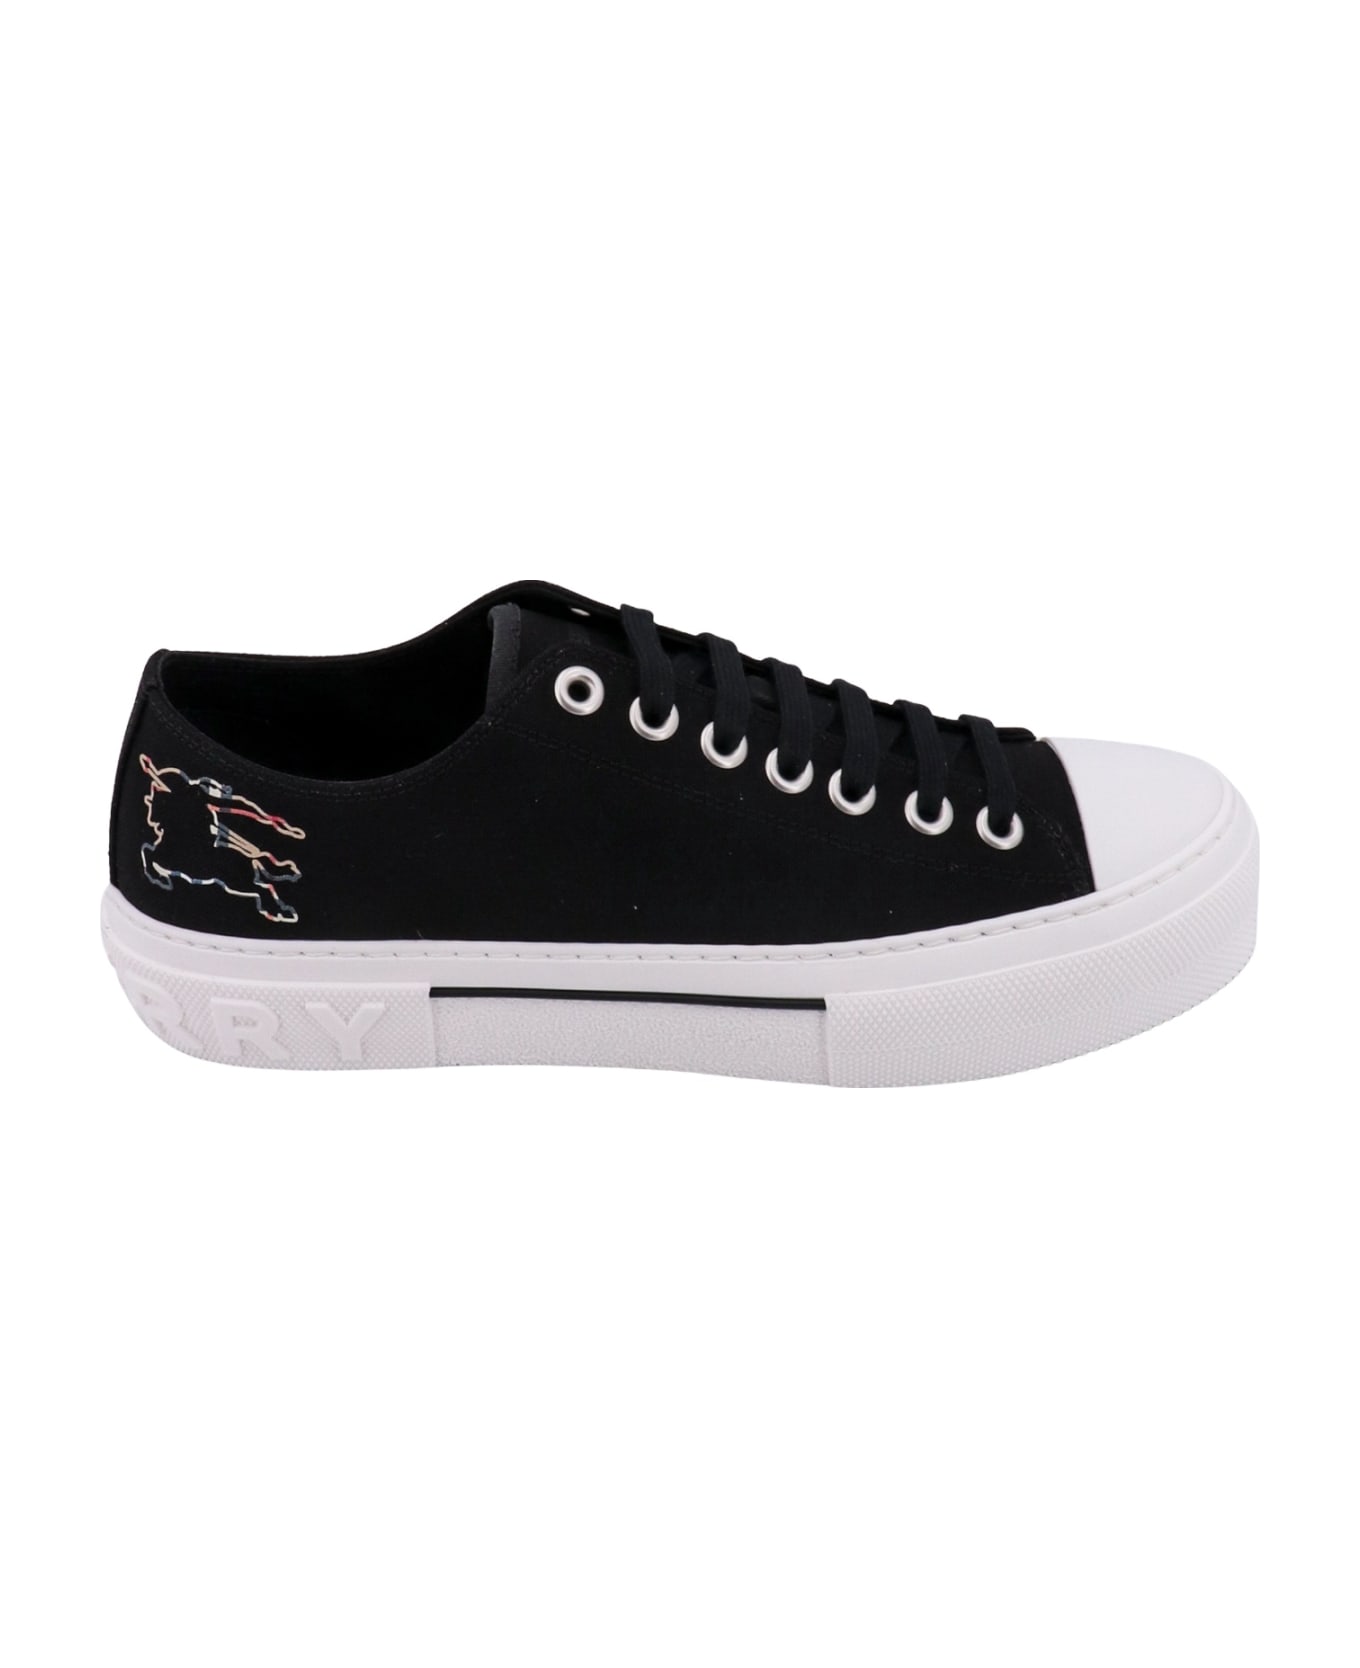 Burberry Monochrome Sneaker With Drawing Detail At The Back In Cotton Man - Black